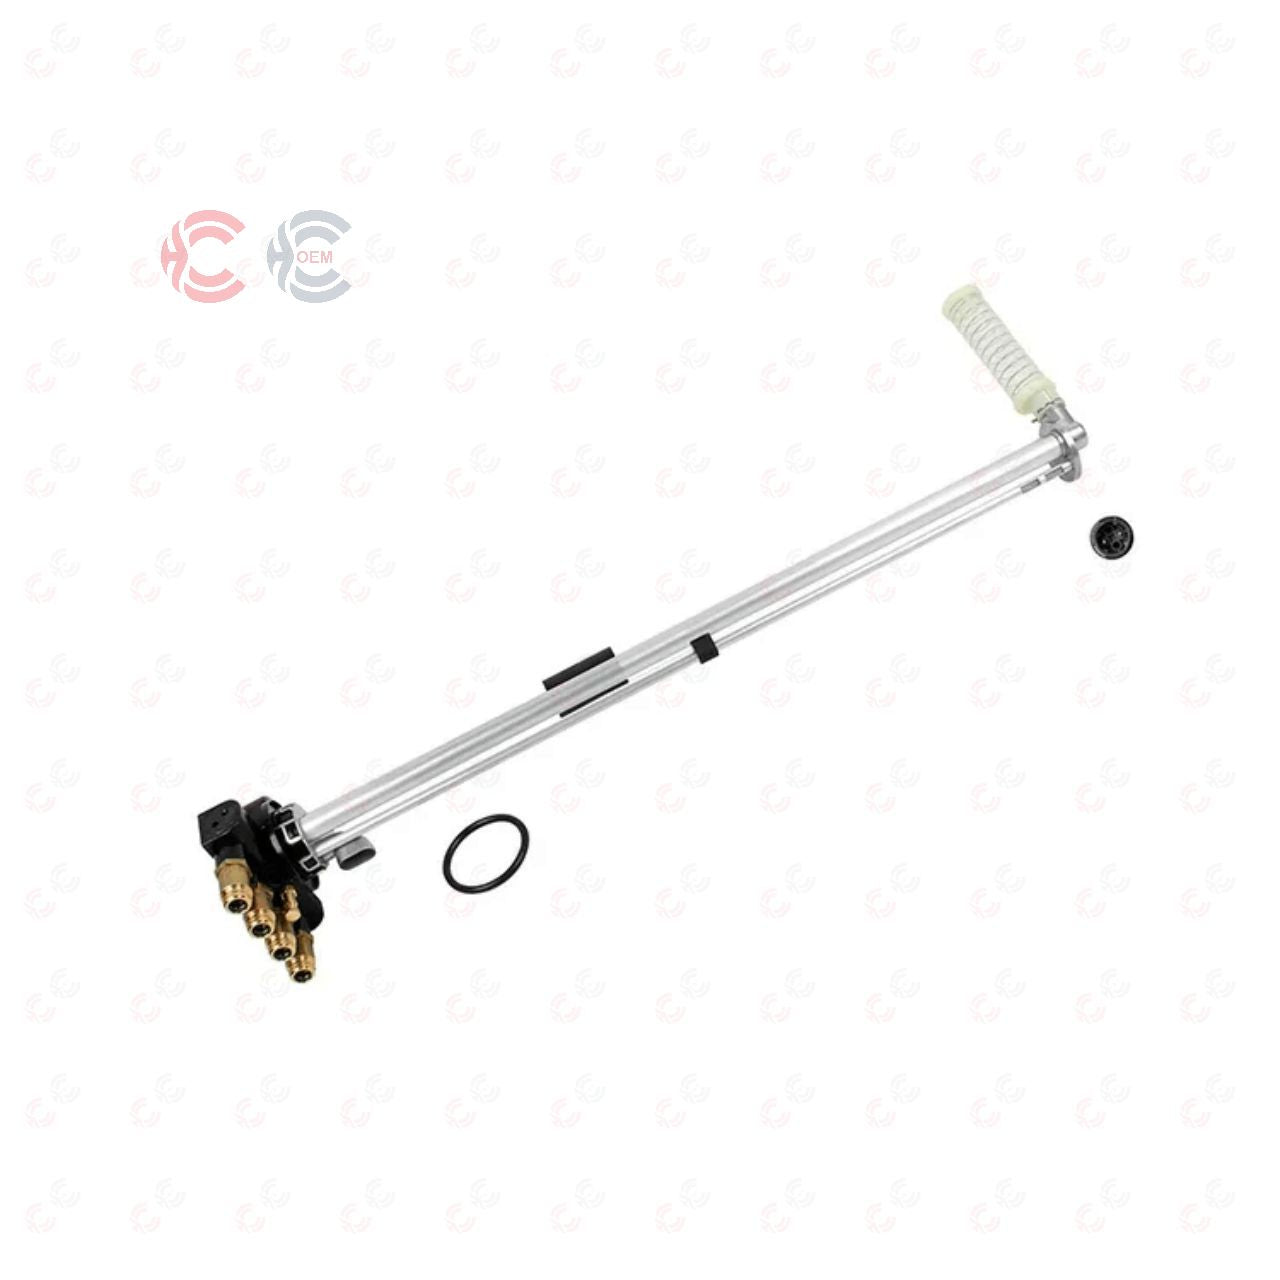 OEM: 1444478Material: ABS metalColor: Black GoldenOrigin: Made in ChinaWeight: 1000gPacking List: 1* Fuel Level Sensor More ServiceWe can provide OEM Manufacturing serviceWe can Be your one-step solution for Auto PartsWe can provide technical scheme for you Feel Free to Contact Us, we will get back to you as soon as possible.